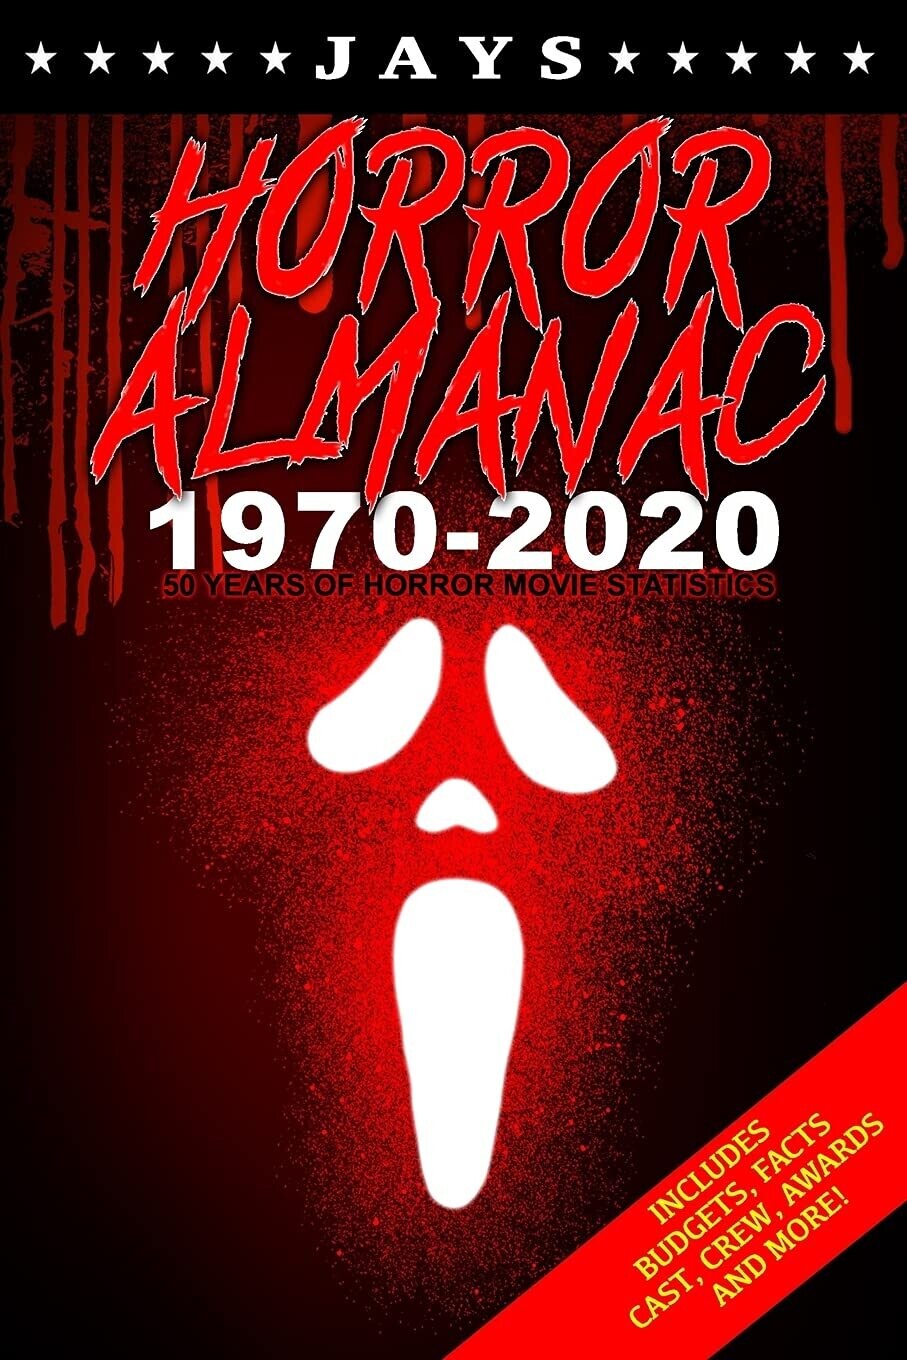 Jays Horror Almanac 1970-2020: 50 Years of Horror Movie Statistics Book (Includes Budgets, Facts, Cast, Crew, Awards & More) [Hardback]